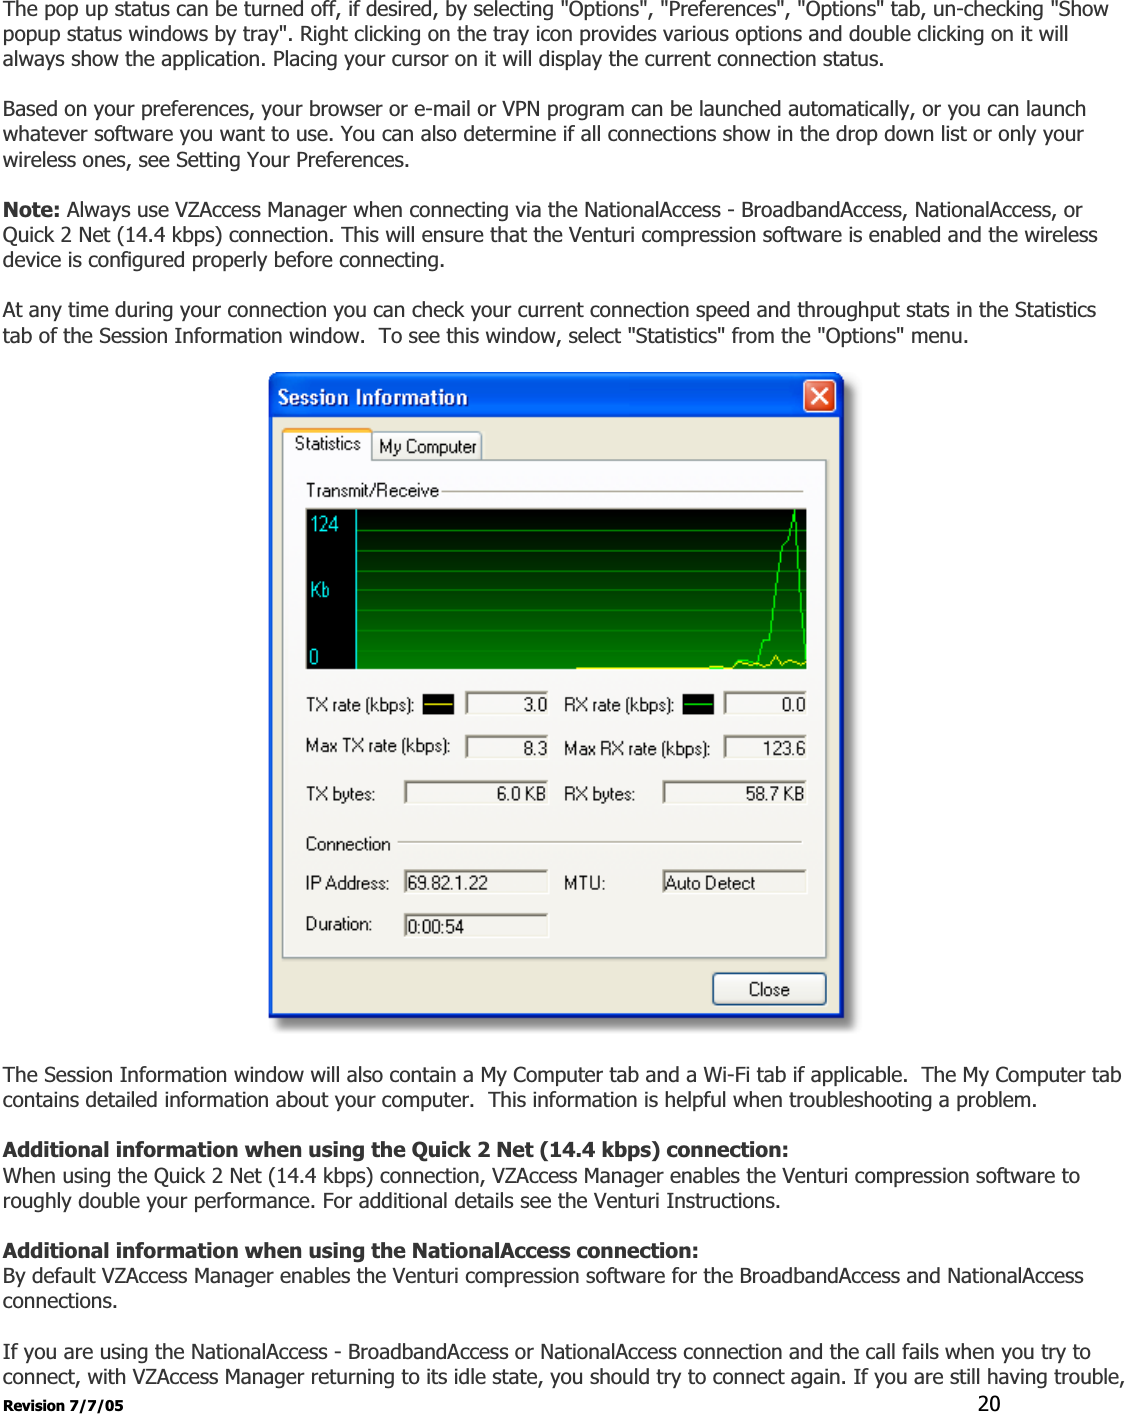 Revision 7/7/05  20The pop up status can be turned off, if desired, by selecting &quot;Options&quot;, &quot;Preferences&quot;, &quot;Options&quot; tab, un-checking &quot;Show popup status windows by tray&quot;. Right clicking on the tray icon provides various options and double clicking on it will always show the application. Placing your cursor on it will display the current connection status. Based on your preferences, your browser or e-mail or VPN program can be launched automatically, or you can launch whatever software you want to use. You can also determine if all connections show in the drop down list or only your wireless ones, see Setting Your Preferences. Note: Always use VZAccess Manager when connecting via the NationalAccess - BroadbandAccess, NationalAccess, or Quick 2 Net (14.4 kbps) connection. This will ensure that the Venturi compression software is enabled and the wireless device is configured properly before connecting. At any time during your connection you can check your current connection speed and throughput stats in the Statistics tab of the Session Information window.  To see this window, select &quot;Statistics&quot; from the &quot;Options&quot; menu. The Session Information window will also contain a My Computer tab and a Wi-Fi tab if applicable.  The My Computer tab contains detailed information about your computer.  This information is helpful when troubleshooting a problem. Additional information when using the Quick 2 Net (14.4 kbps) connection: When using the Quick 2 Net (14.4 kbps) connection, VZAccess Manager enables the Venturi compression software to roughly double your performance. For additional details see the Venturi Instructions. Additional information when using the NationalAccess connection: By default VZAccess Manager enables the Venturi compression software for the BroadbandAccess and NationalAccess connections. If you are using the NationalAccess - BroadbandAccess or NationalAccess connection and the call fails when you try to connect, with VZAccess Manager returning to its idle state, you should try to connect again. If you are still having trouble, 